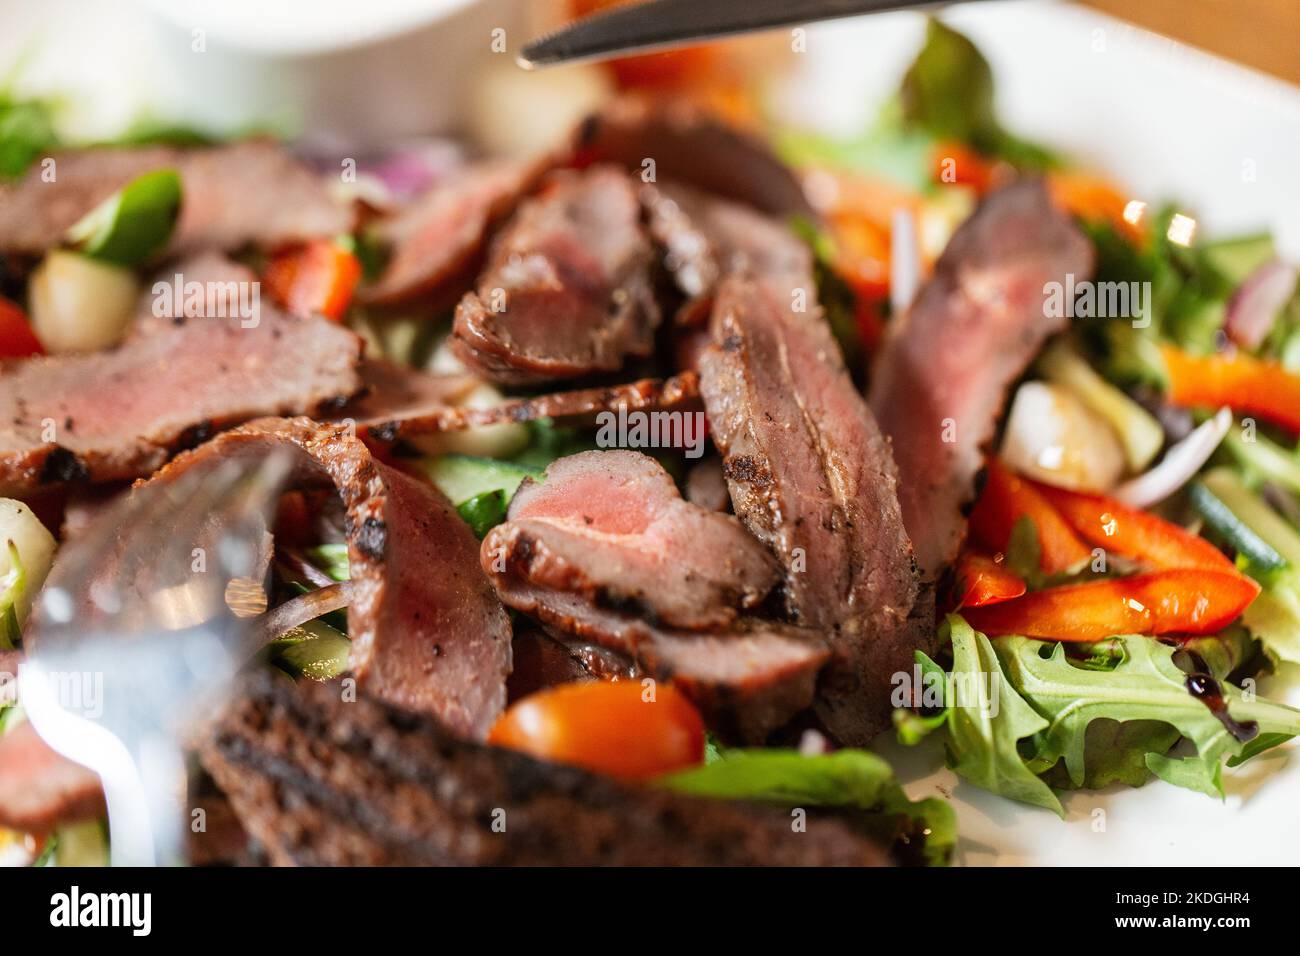 close up of meat with vegetable salad on plate Stock Photo